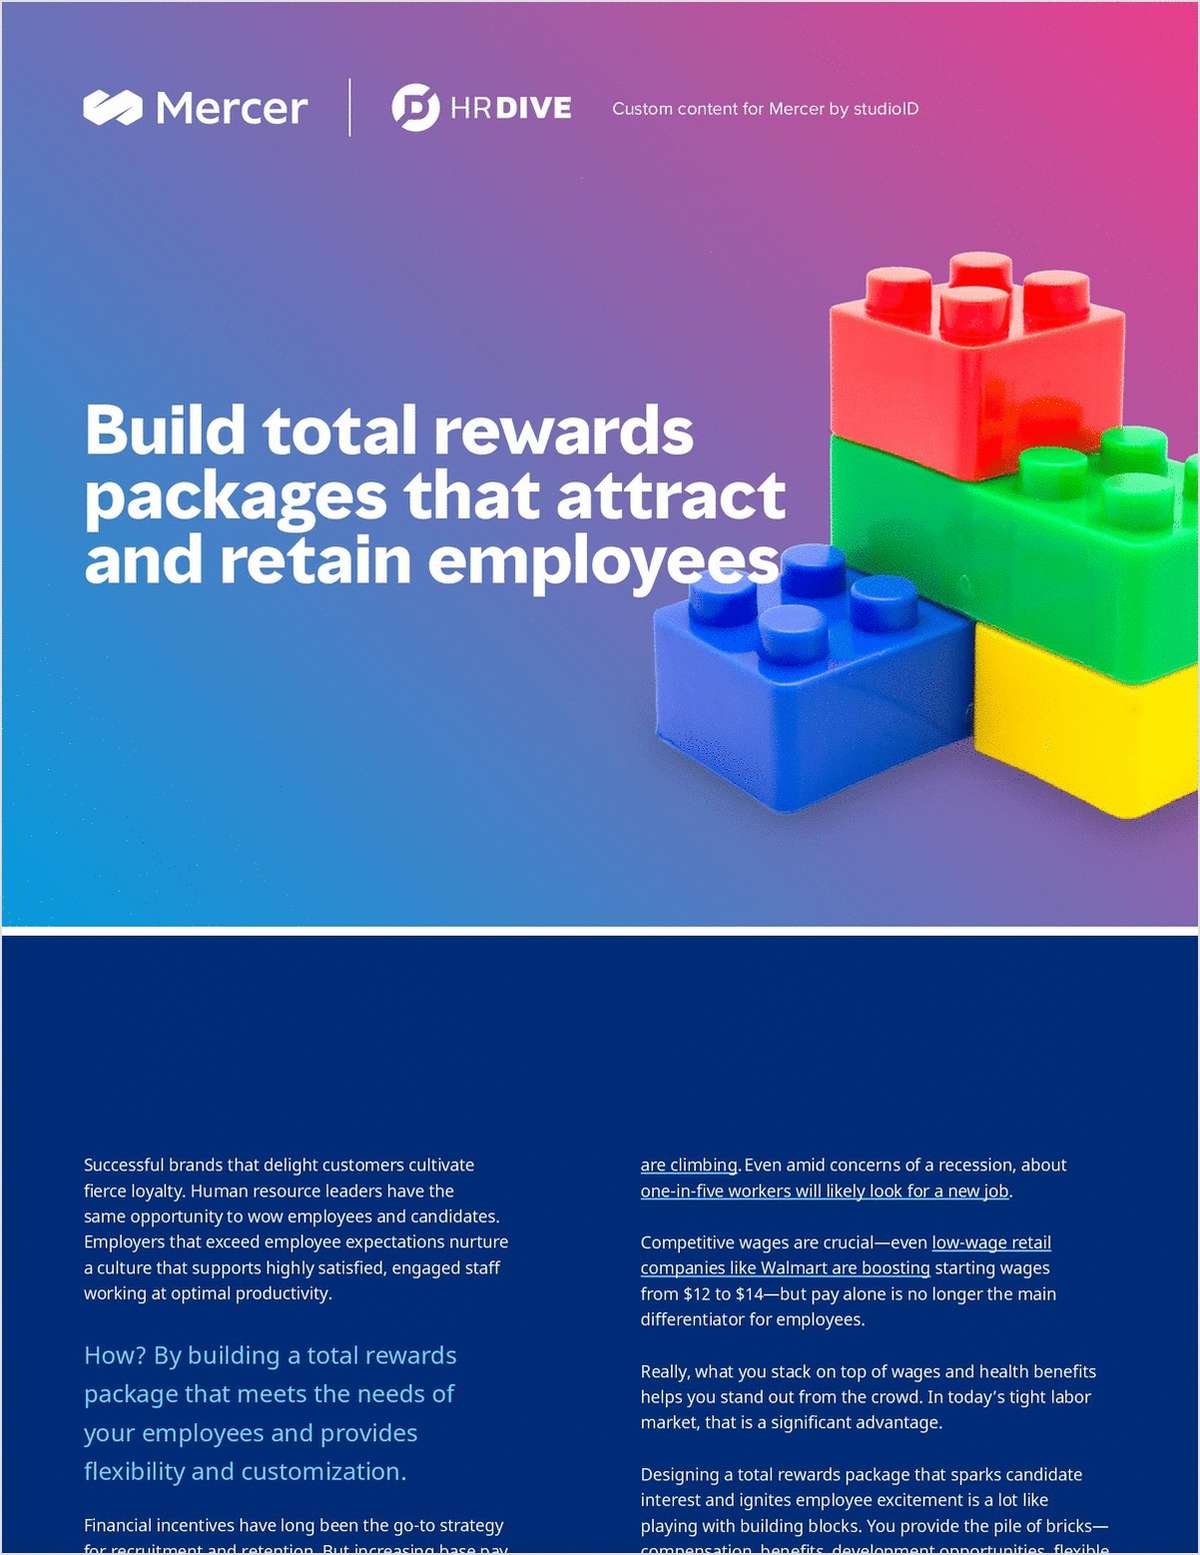 Build Total Rewards Packages That Attract and Retain Employees